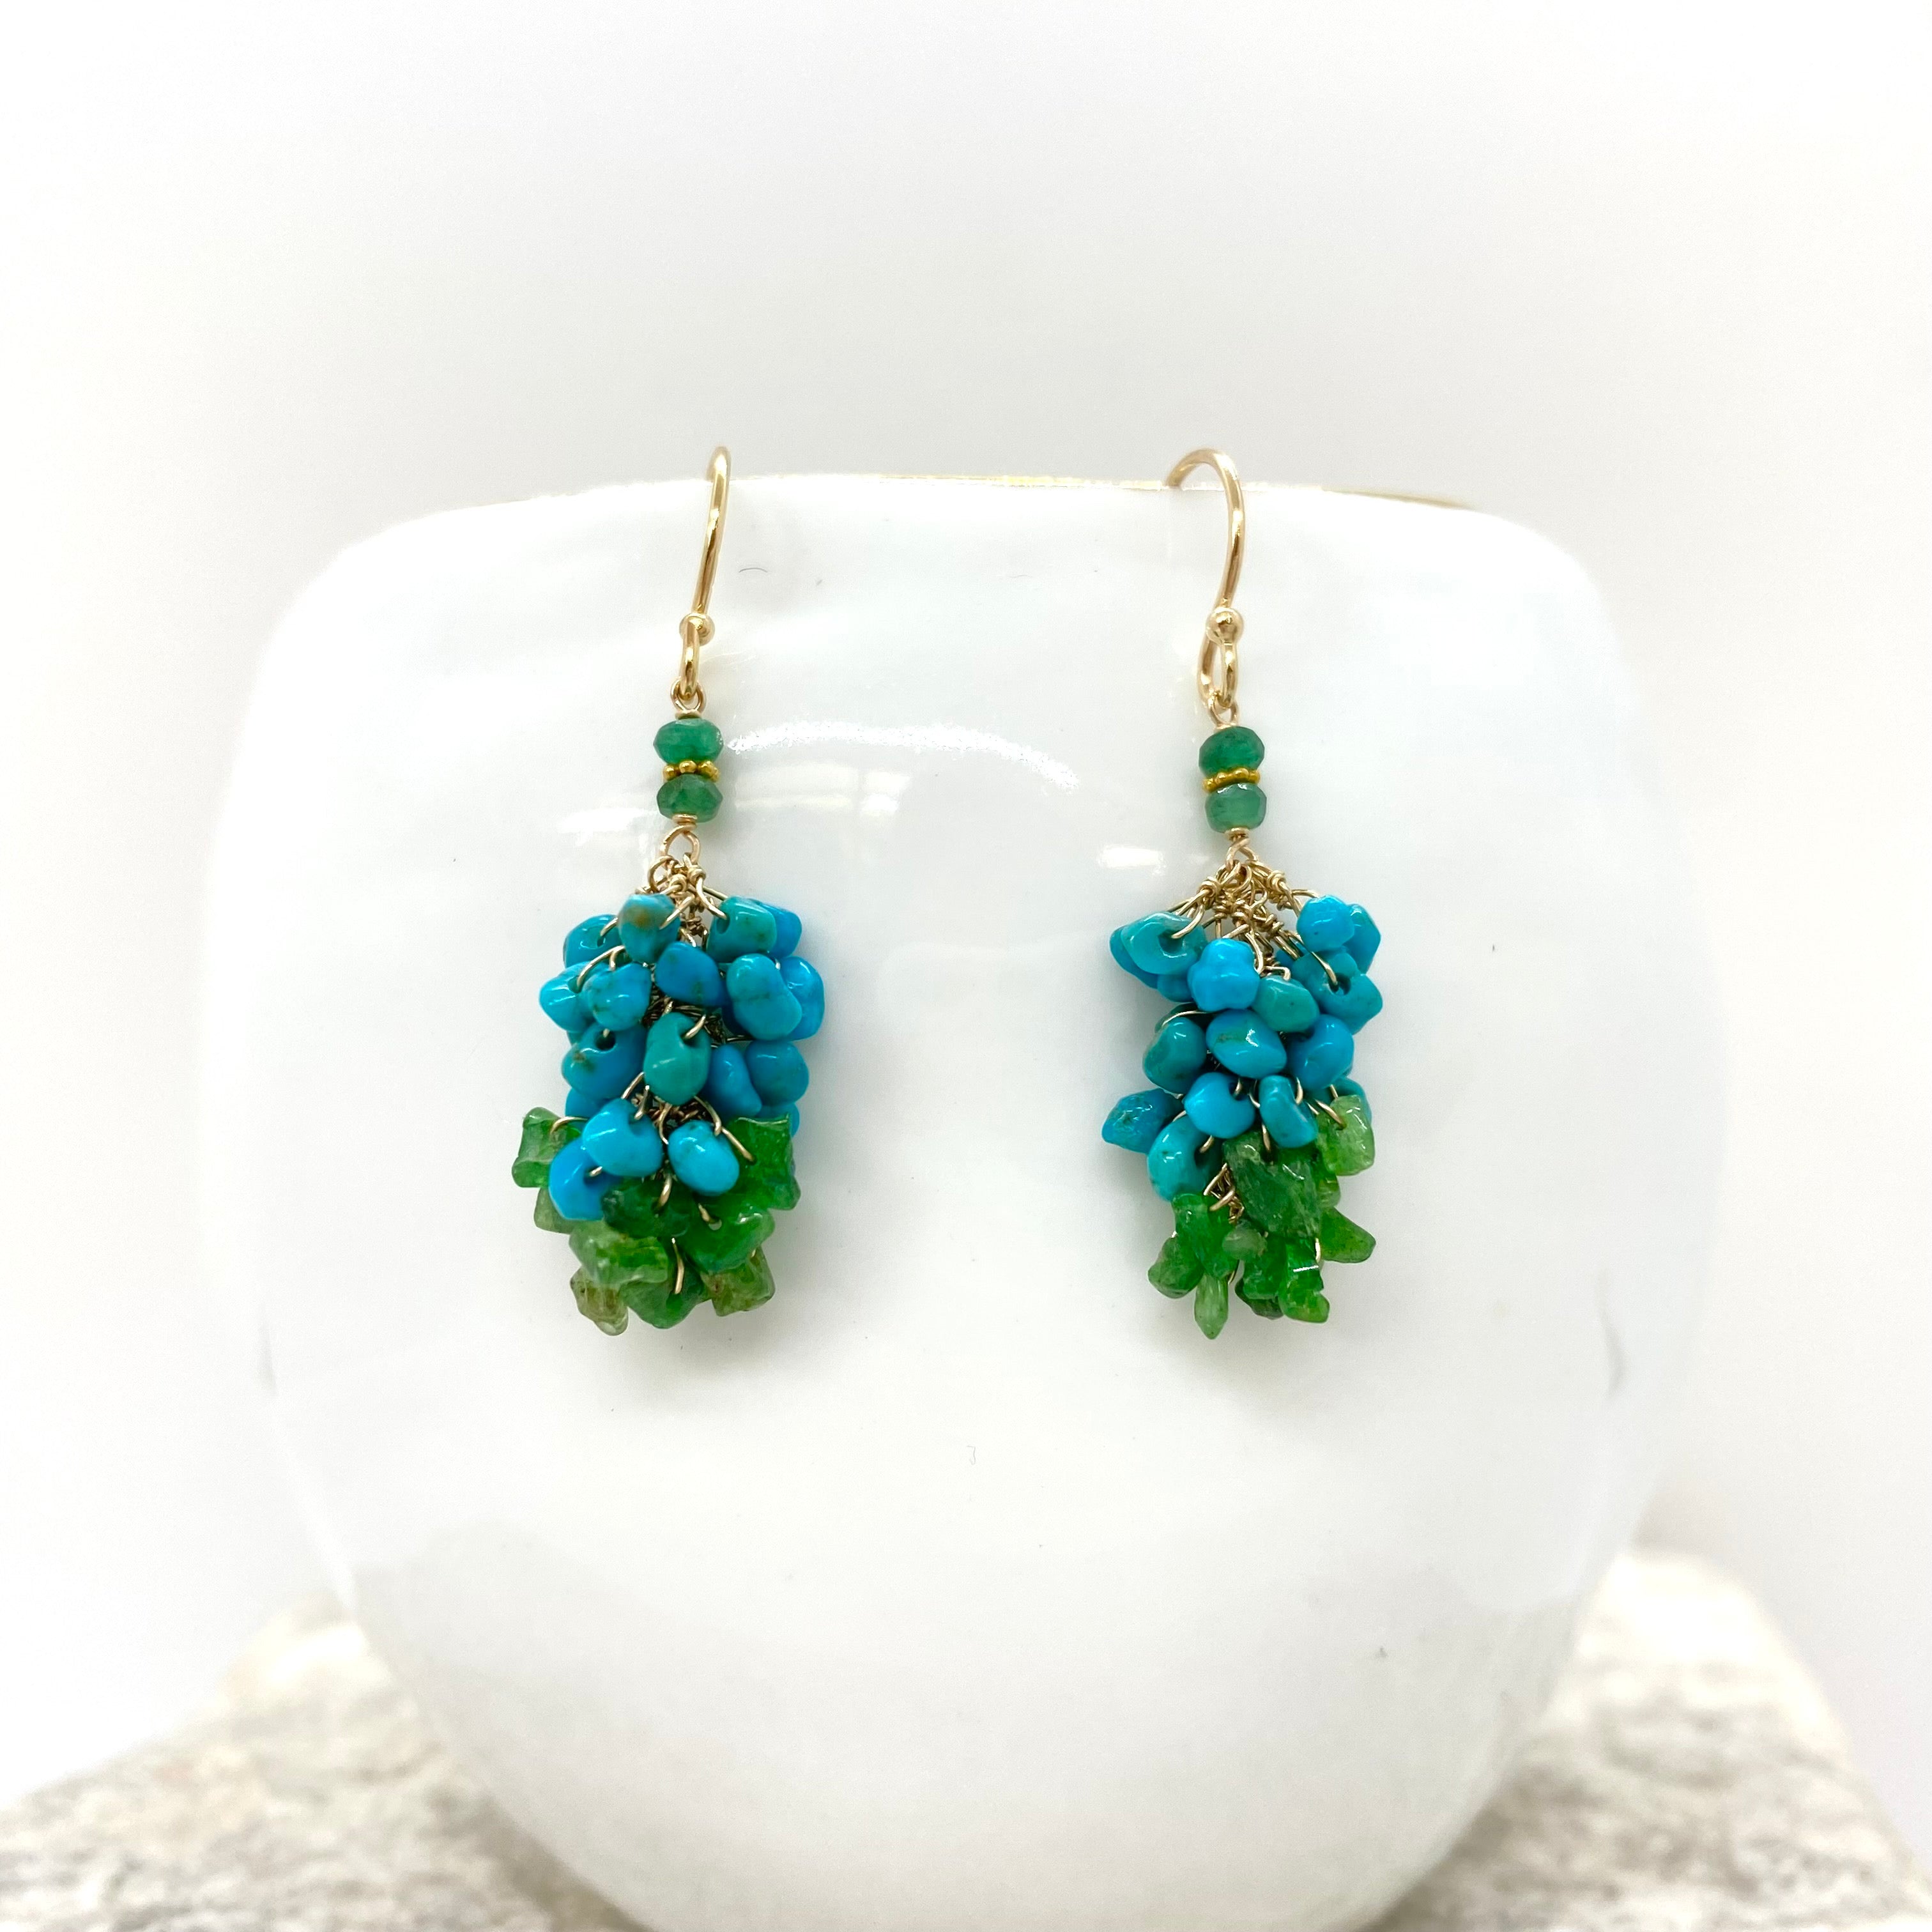 14k Gold Earrings w/ Turquoise Chips, Emerald Chips & 18k Gold Daisy